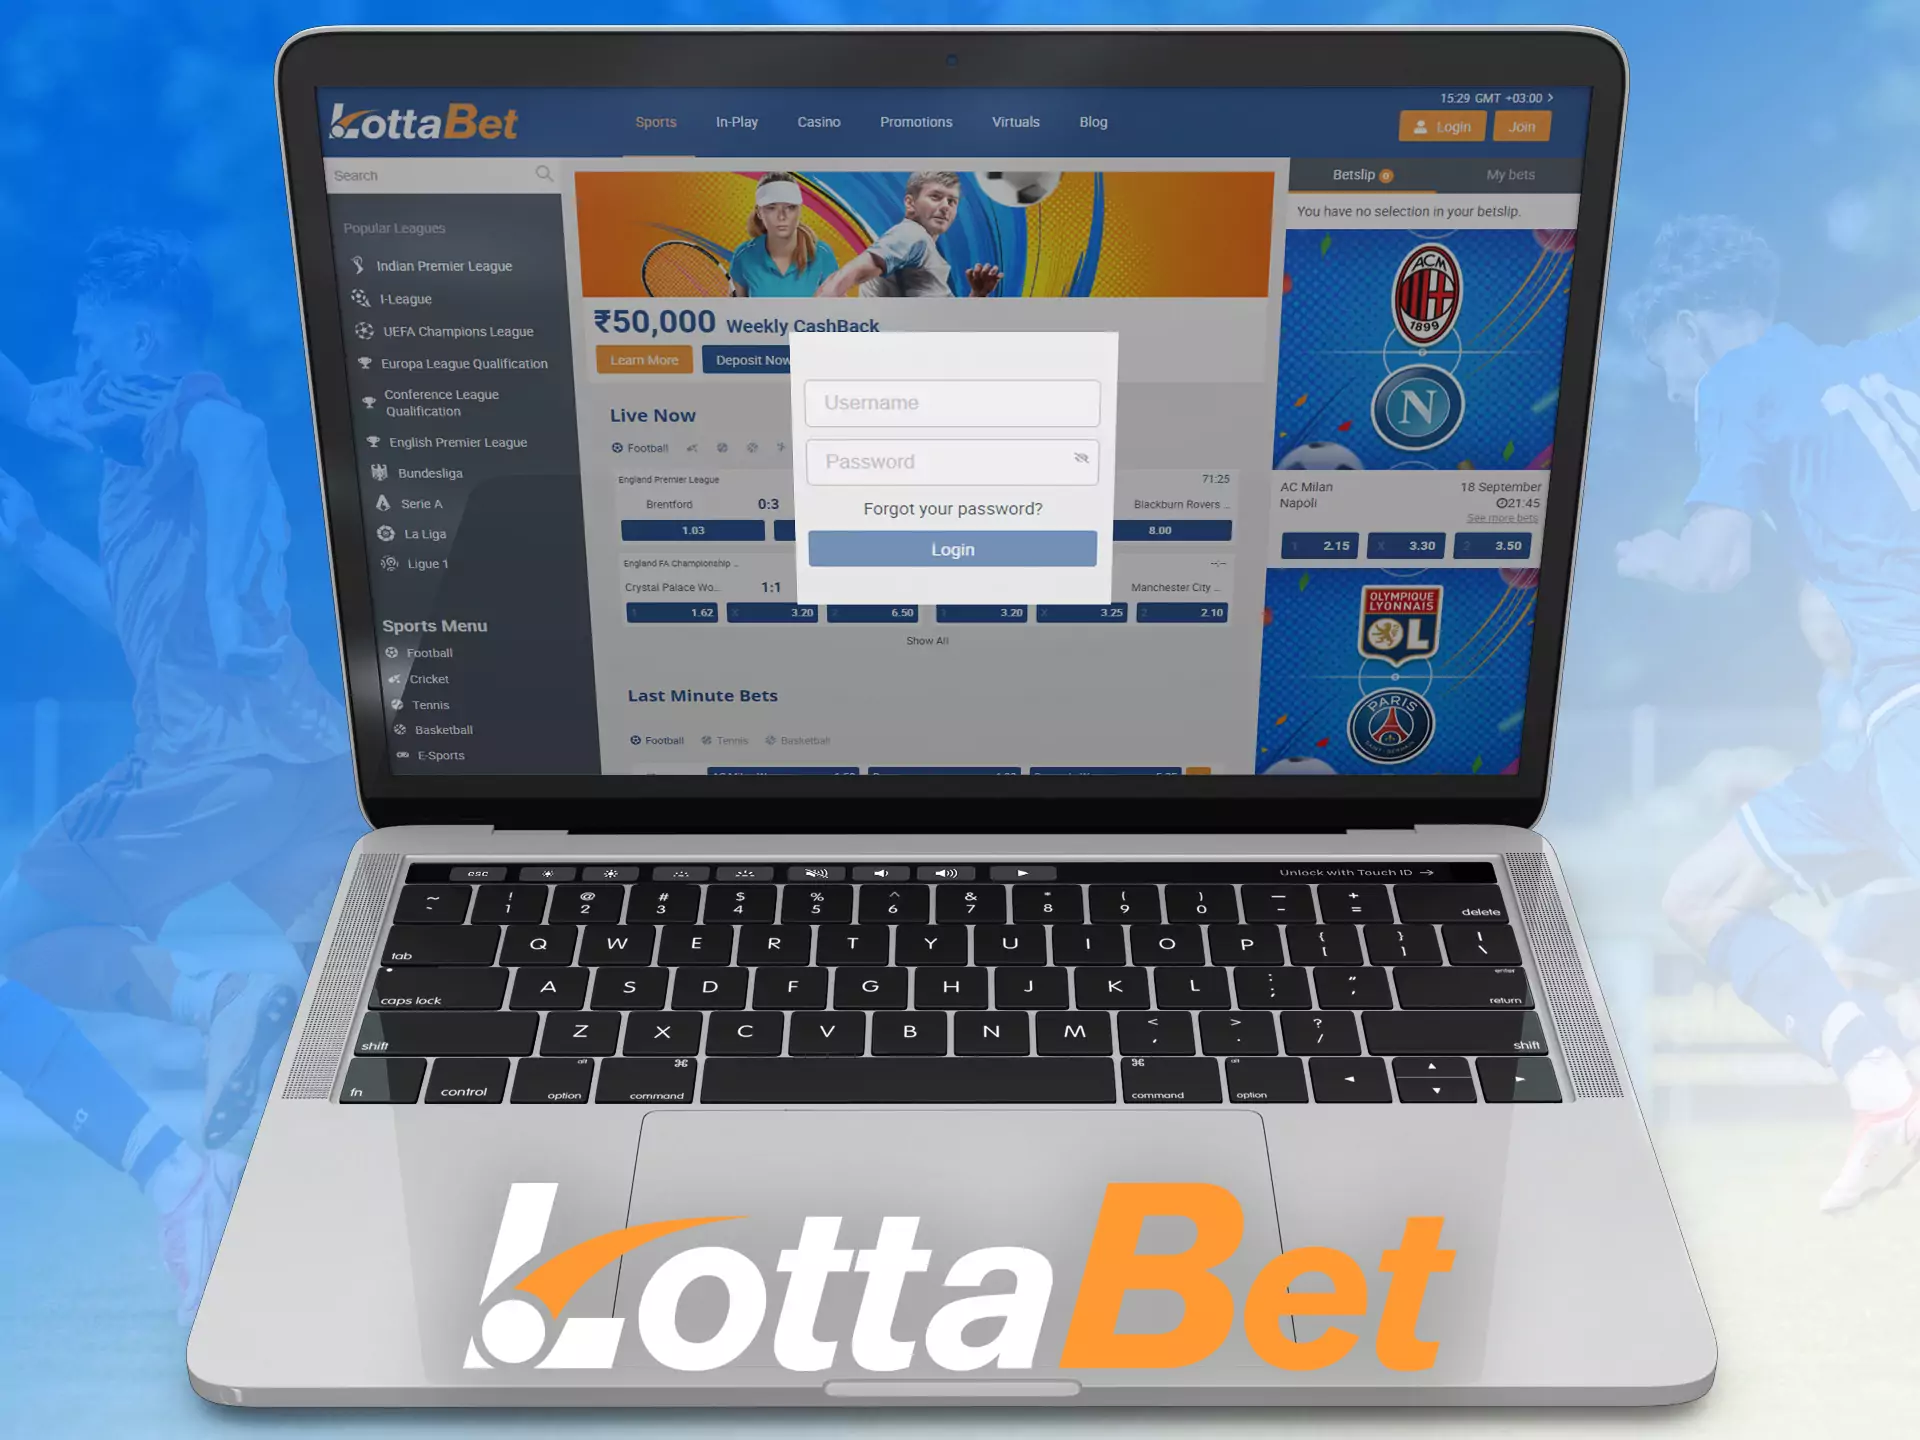 Enter your username and password to log into the Lottabet account.